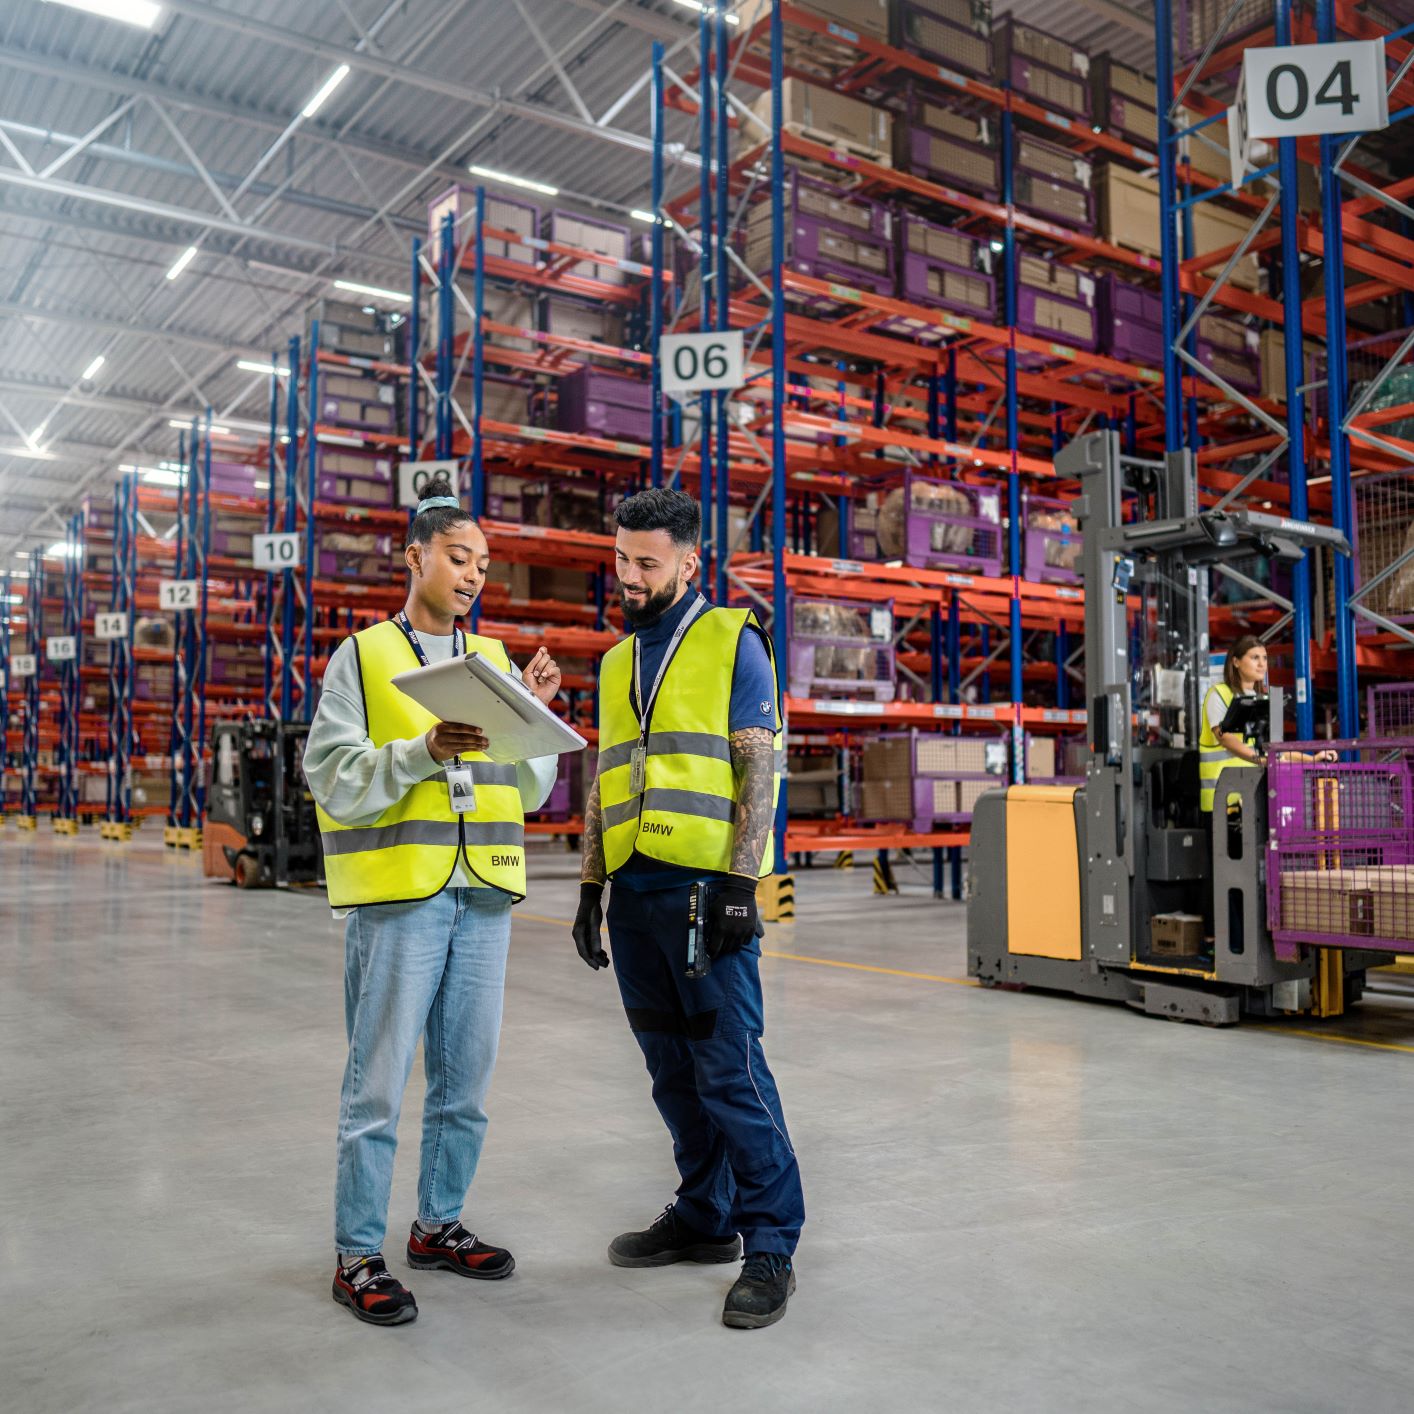 The picture shows two BMW logistics employees talking in a warehouse.